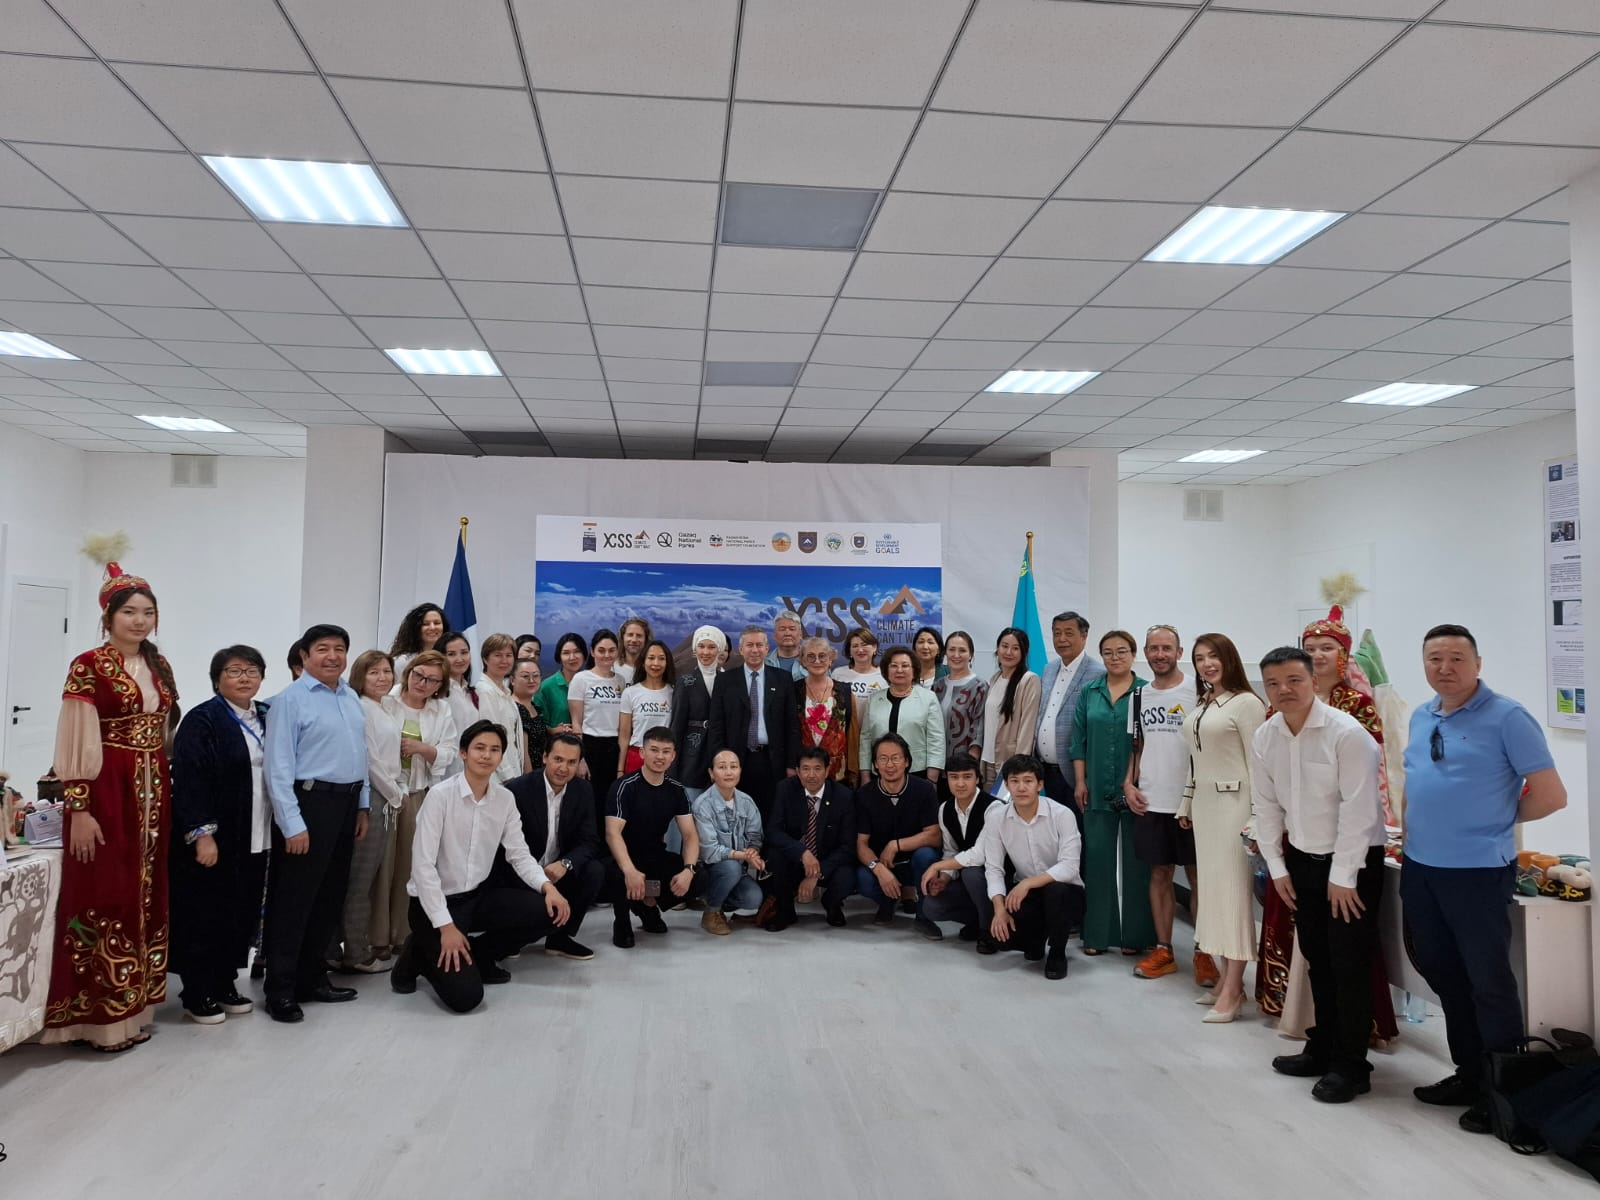 THE OPENING OF A SERIES OF EVENTS TO LAUNCH THE THIRD EDITION OF THE INTERNATIONAL PROJECT "CLIMATE DOES NOT WAIT" TOGETHER WITH THE XCSS ASSOCIATION (FRANCE), DEDICATED TO THE 90TH ANNIVERSARY OF KAZNU AND THE 10TH ANNIVERSARY OF GAINING THE STATUS OF A GLOBAL HUB OF THE UN ACADEMIC IMPACT PROGRAM ON SUSTAINABLE DEVELOPMENT, TOOK PLACE